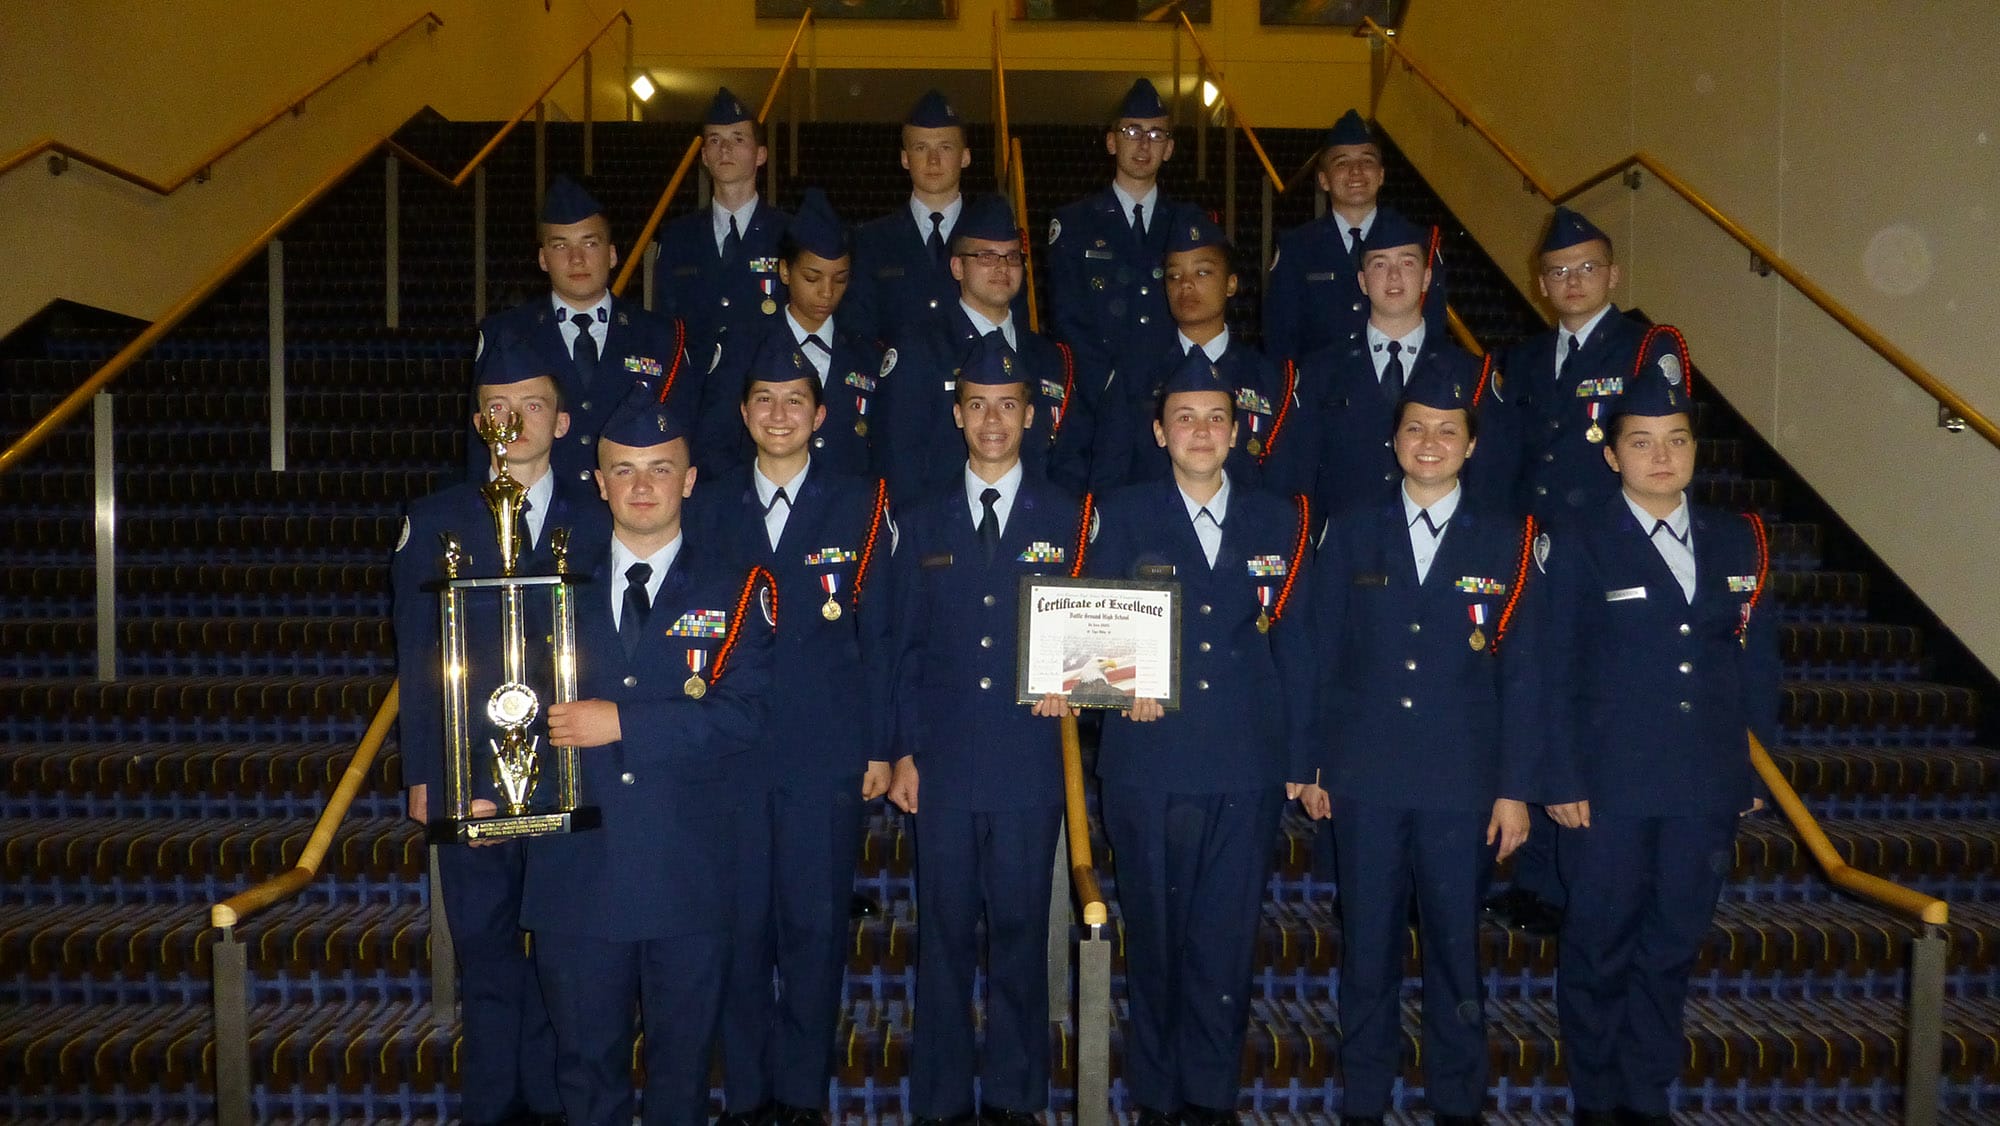 Battle Ground: Battle Ground High School's AFJROTC Unarmed Drill Team poses at the 2014 National High School Drill Championships in early May at Daytona Beach, Fla., where they placed fifth in the Exhibition Drill competition.